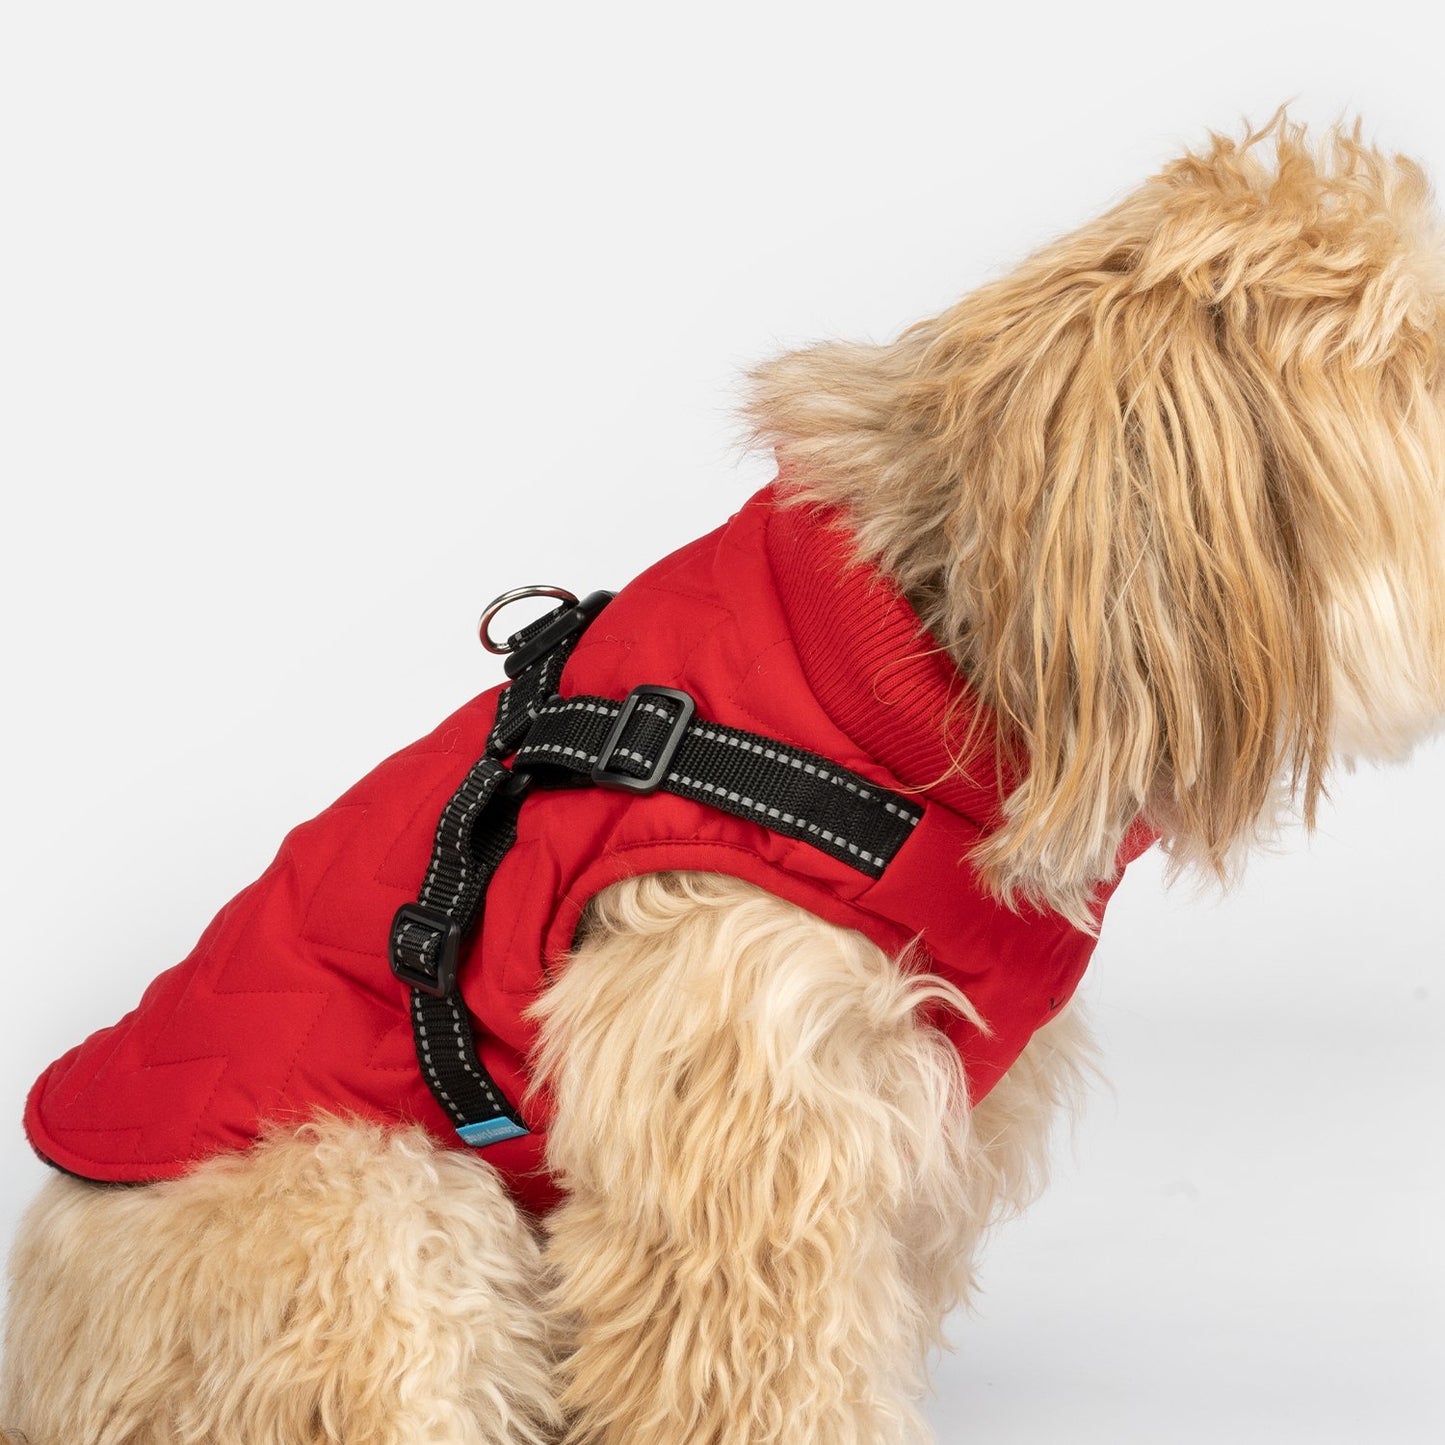 Quilted Dog Jacket With Built-In Harness - Red